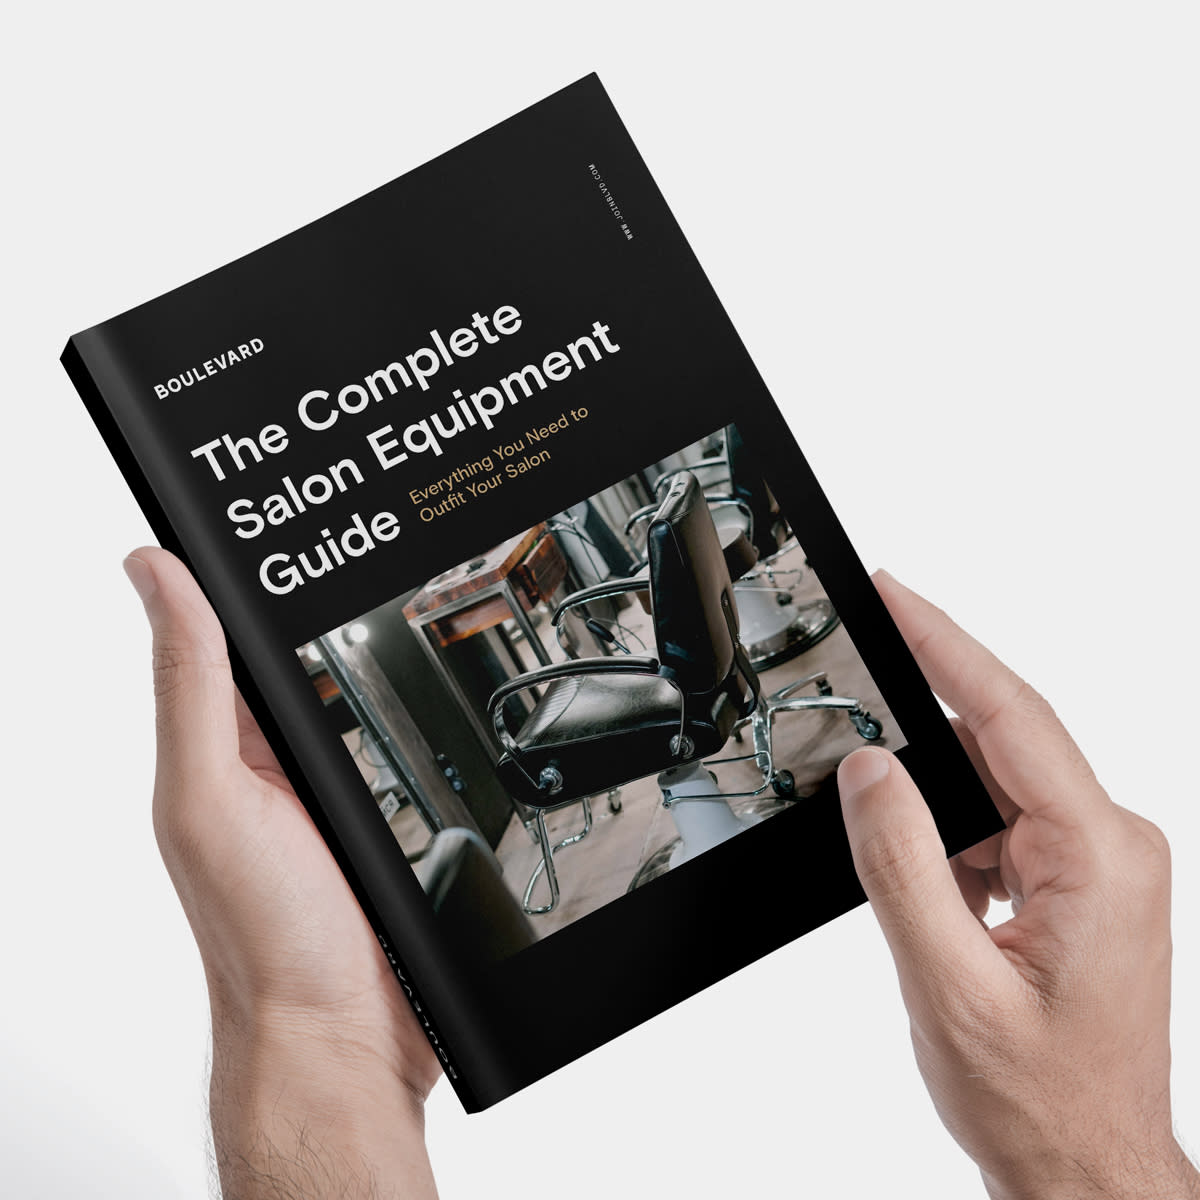 Scissors? Check. Towels? Check. COVID-19 PPE? Check. Our Salon Equipment Guide lists every essential item you need to help your clients look their best while keeping everyone safe. On top of the latest COVID-19 guidance, it includes a full equipment checklist, complete with price ranges. 

